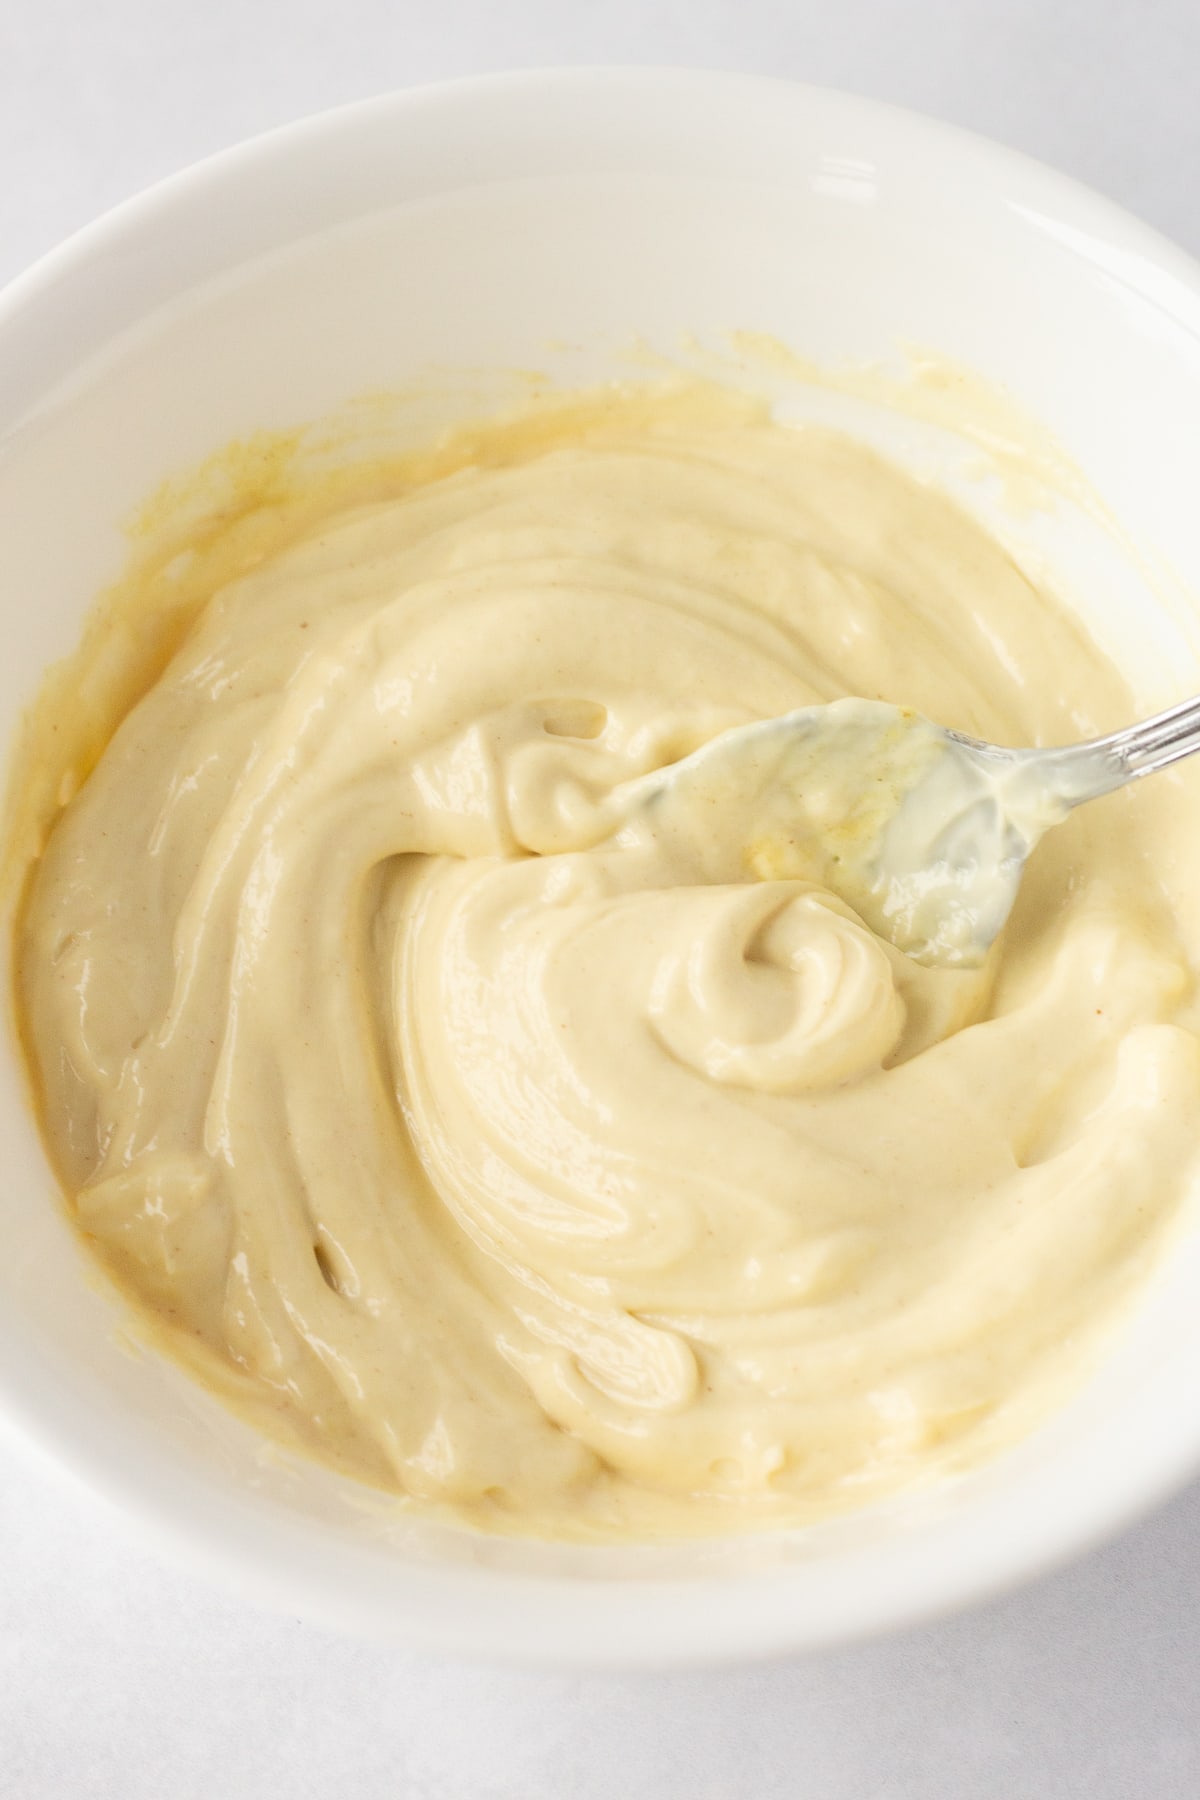 A white bowl with a mixture of mayo and dijon mustard, with a spoon.